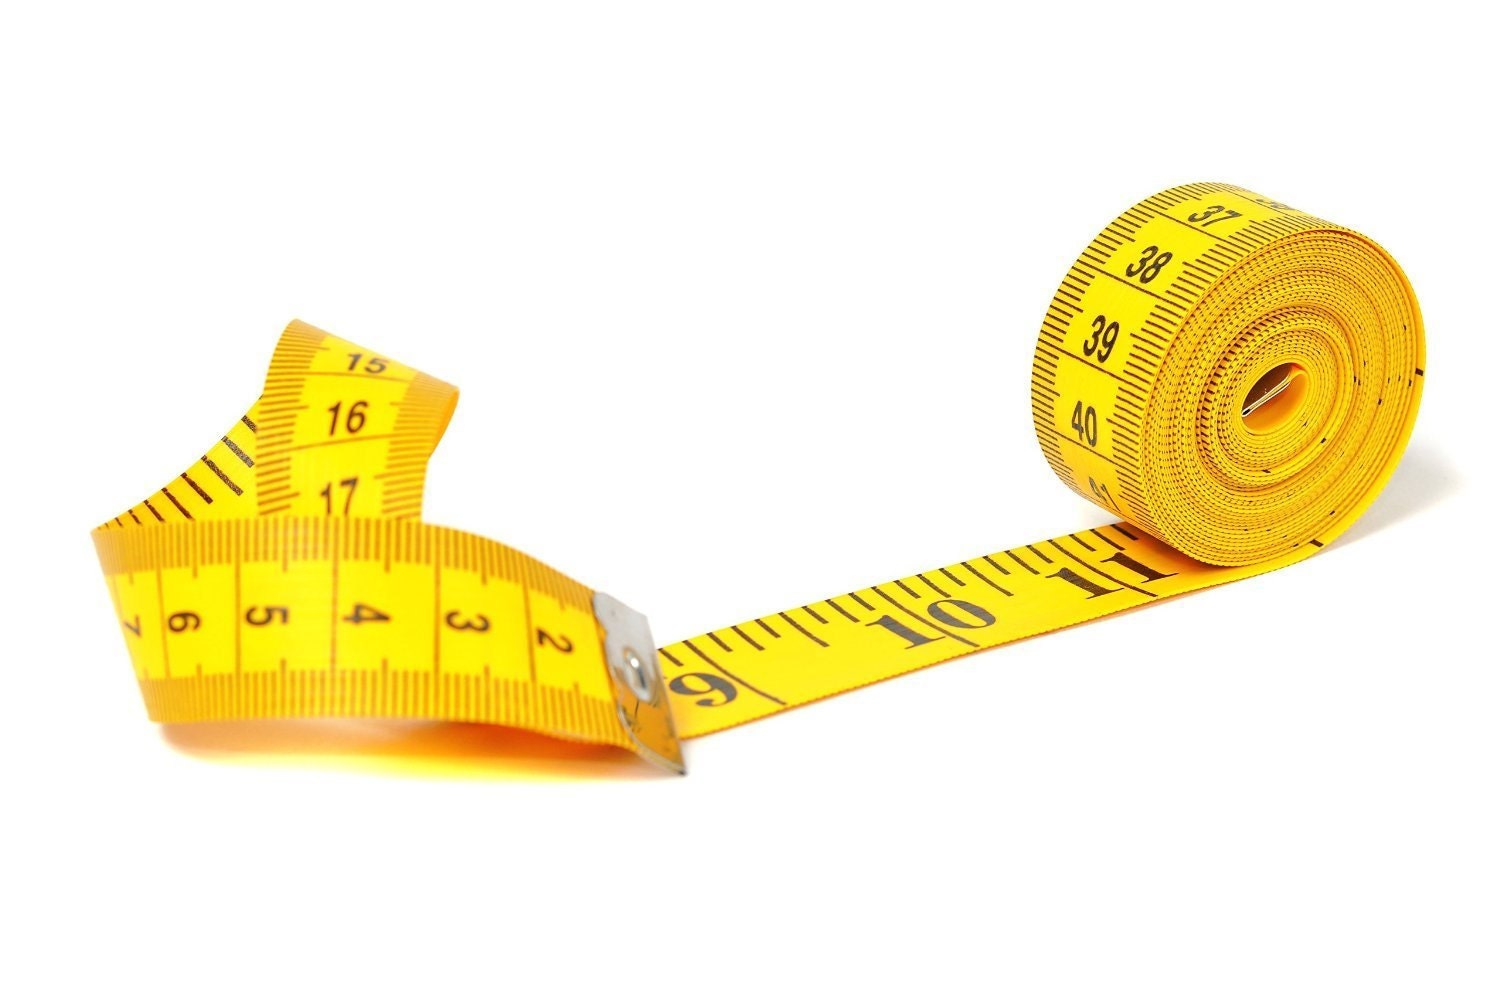 Tape Measure Body Measuring Tape 60inch and 50 similar items